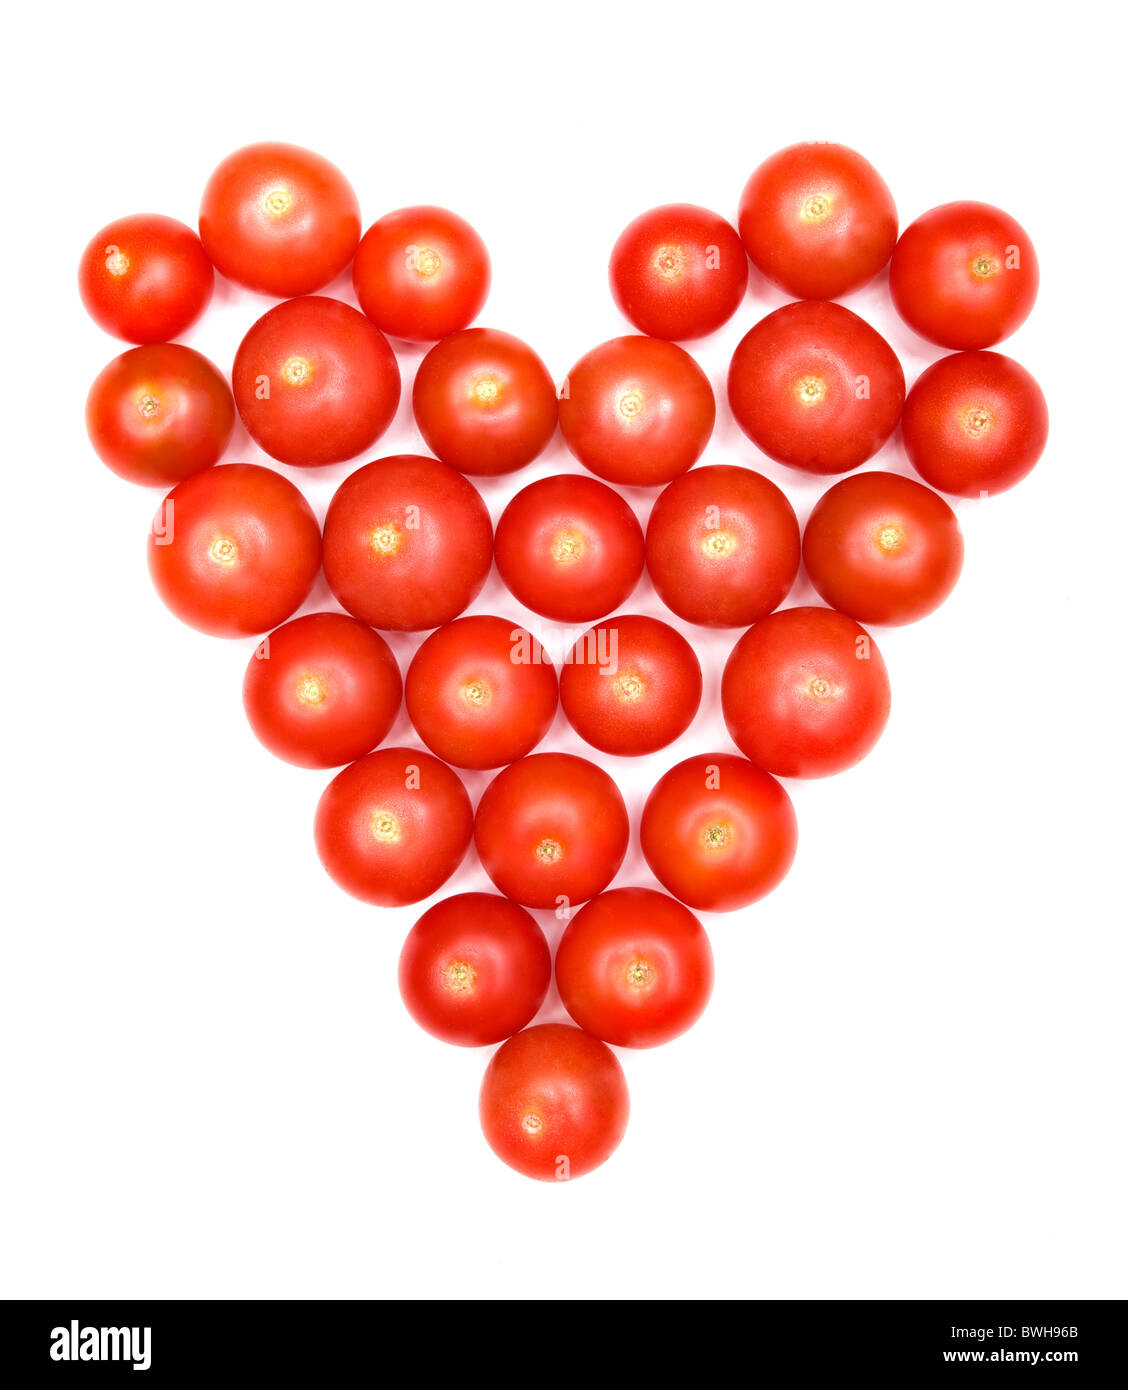 Tomatoes formed into Heart Shape - A Healthy Diet Stock Photo